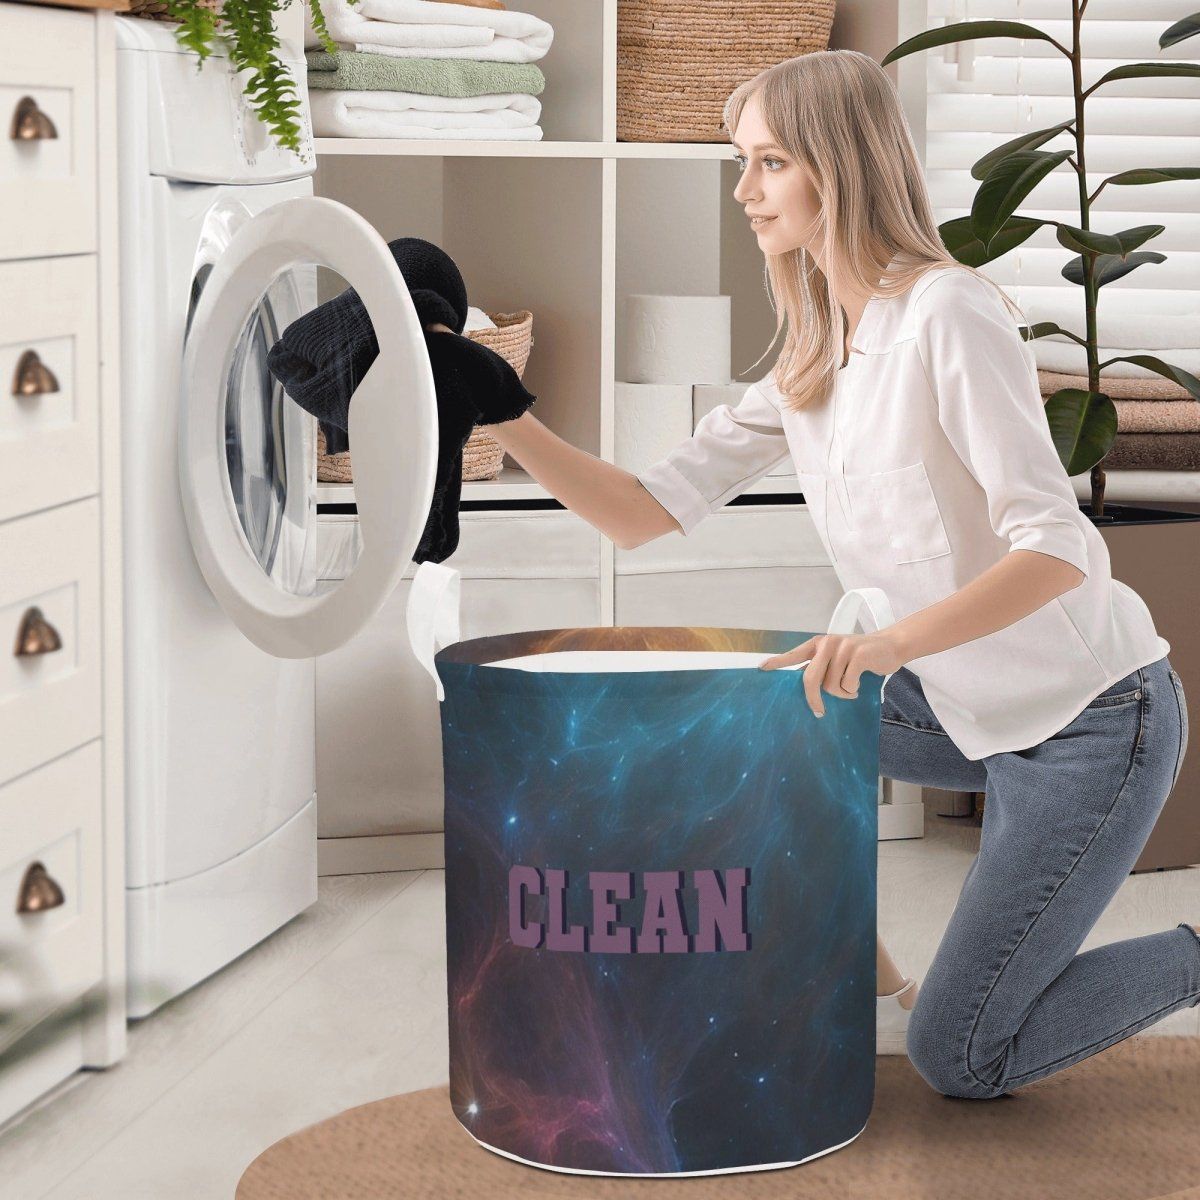 Round Clean Laundry Basket - Space-Saving Organizer for a Neat Home - Iron Phoenix GHG